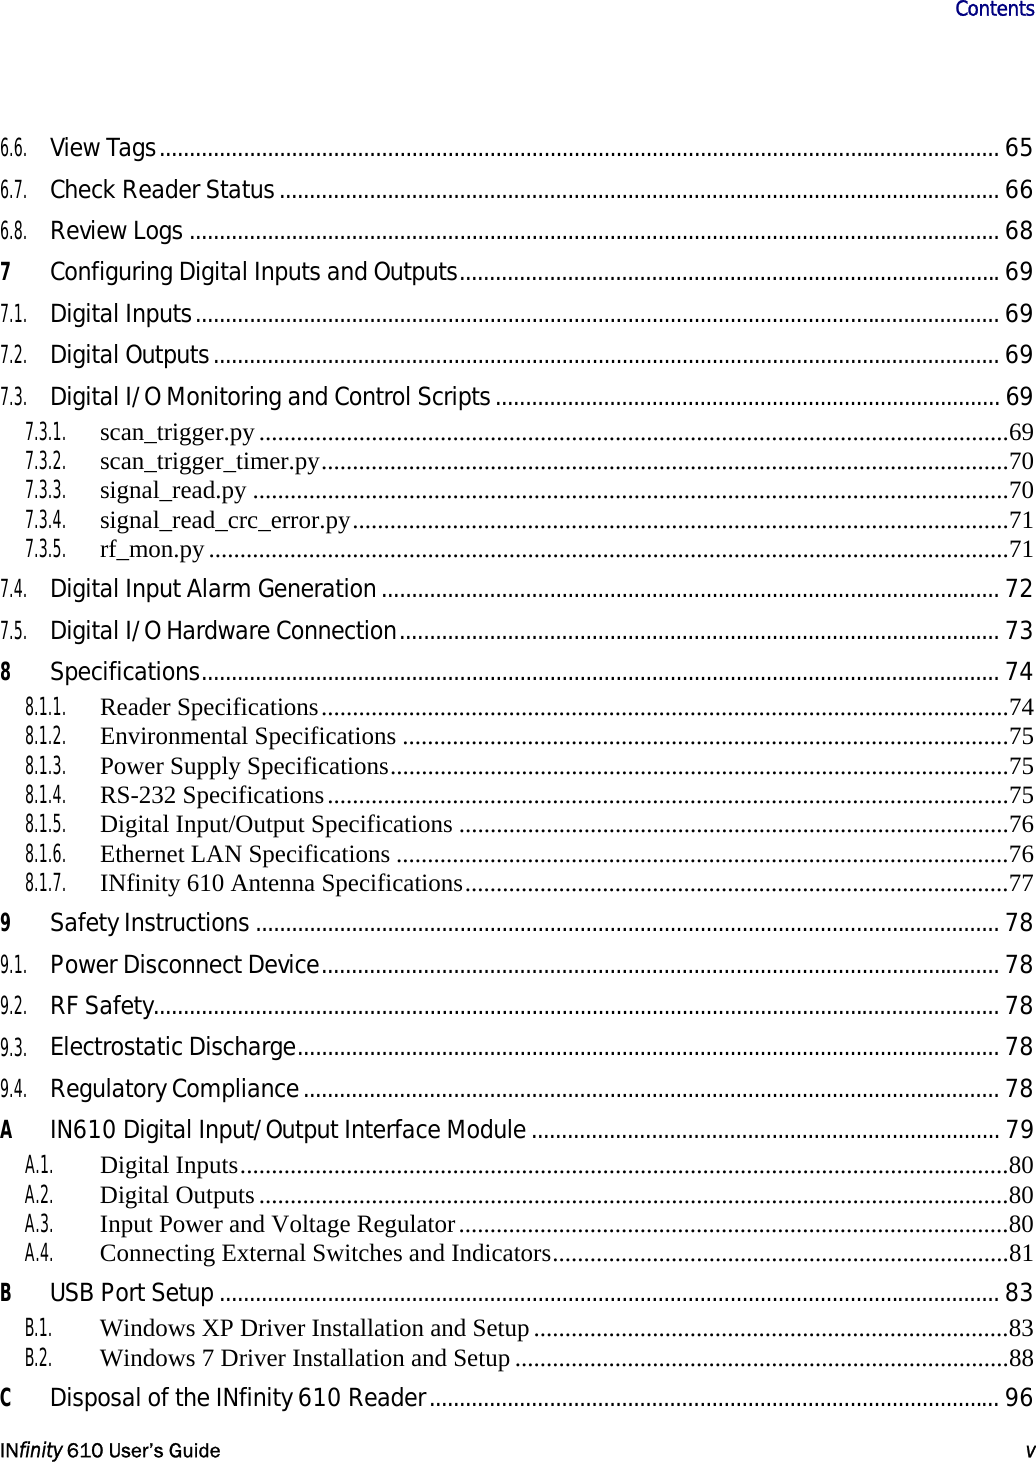                       Contents   INfinity 610 User’s Guide  v  6.6. View Tags............................................................................................................................................ 65 6.7. Check Reader Status........................................................................................................................ 66 6.8. Review Logs ....................................................................................................................................... 68 7 Configuring Digital Inputs and Outputs..........................................................................................69 7.1. Digital Inputs...................................................................................................................................... 69 7.2. Digital Outputs................................................................................................................................... 69 7.3. Digital I/O Monitoring and Control Scripts.................................................................................... 69 7.3.1. scan_trigger.py........................................................................................................................69 7.3.2. scan_trigger_timer.py..............................................................................................................70 7.3.3. signal_read.py .........................................................................................................................70 7.3.4. signal_read_crc_error.py.........................................................................................................71 7.3.5. rf_mon.py................................................................................................................................71 7.4. Digital Input Alarm Generation....................................................................................................... 72 7.5. Digital I/O Hardware Connection.................................................................................................... 73 8 Specifications..................................................................................................................................... 74 8.1.1. Reader Specifications..............................................................................................................74 8.1.2. Environmental Specifications .................................................................................................75 8.1.3.  Power Supply Specifications...................................................................................................75 8.1.4. RS-232 Specifications.............................................................................................................75 8.1.5.  Digital Input/Output Specifications ........................................................................................76 8.1.6.  Ethernet LAN Specifications ..................................................................................................76 8.1.7.  INfinity 610 Antenna Specifications.......................................................................................77 9 Safety Instructions ............................................................................................................................ 78 9.1. Power Disconnect Device................................................................................................................. 78 9.2. RF Safety............................................................................................................................................. 78 9.3. Electrostatic Discharge..................................................................................................................... 78 9.4. Regulatory Compliance.................................................................................................................... 78 A IN610 Digital Input/Output Interface Module.............................................................................. 79 A.1. Digital Inputs...........................................................................................................................80 A.2. Digital Outputs........................................................................................................................80 A.3.  Input Power and Voltage Regulator........................................................................................80 A.4.  Connecting External Switches and Indicators.........................................................................81 B USB Port Setup .................................................................................................................................. 83 B.1.  Windows XP Driver Installation and Setup............................................................................83 B.2.  Windows 7 Driver Installation and Setup ...............................................................................88 C Disposal of the INfinity 610 Reader............................................................................................... 96 